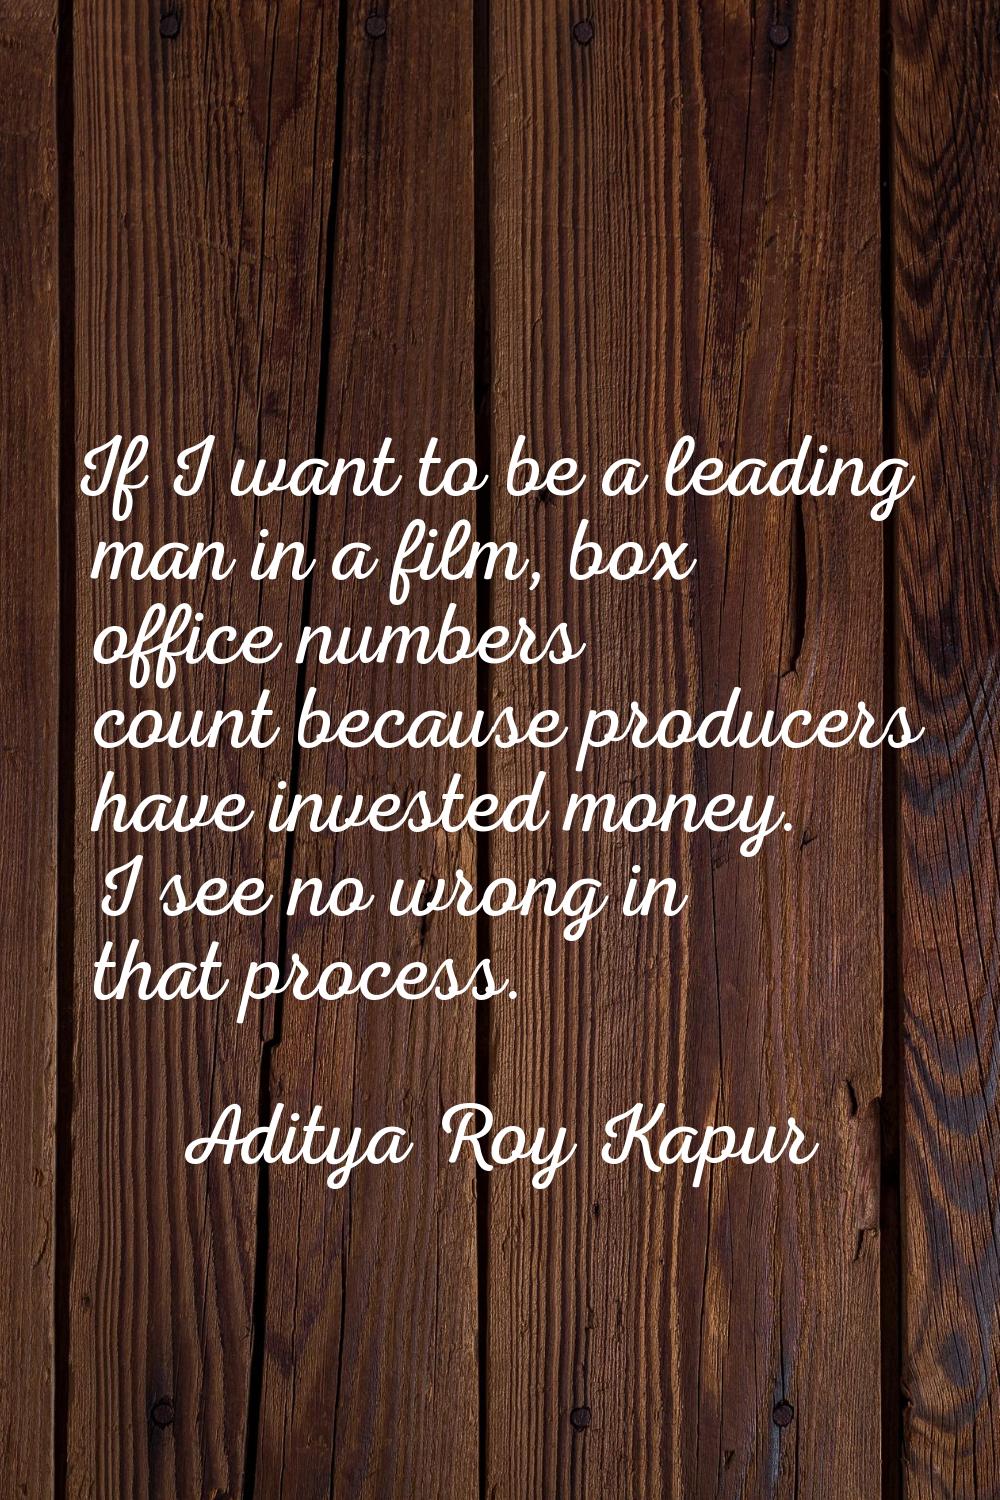 If I want to be a leading man in a film, box office numbers count because producers have invested m